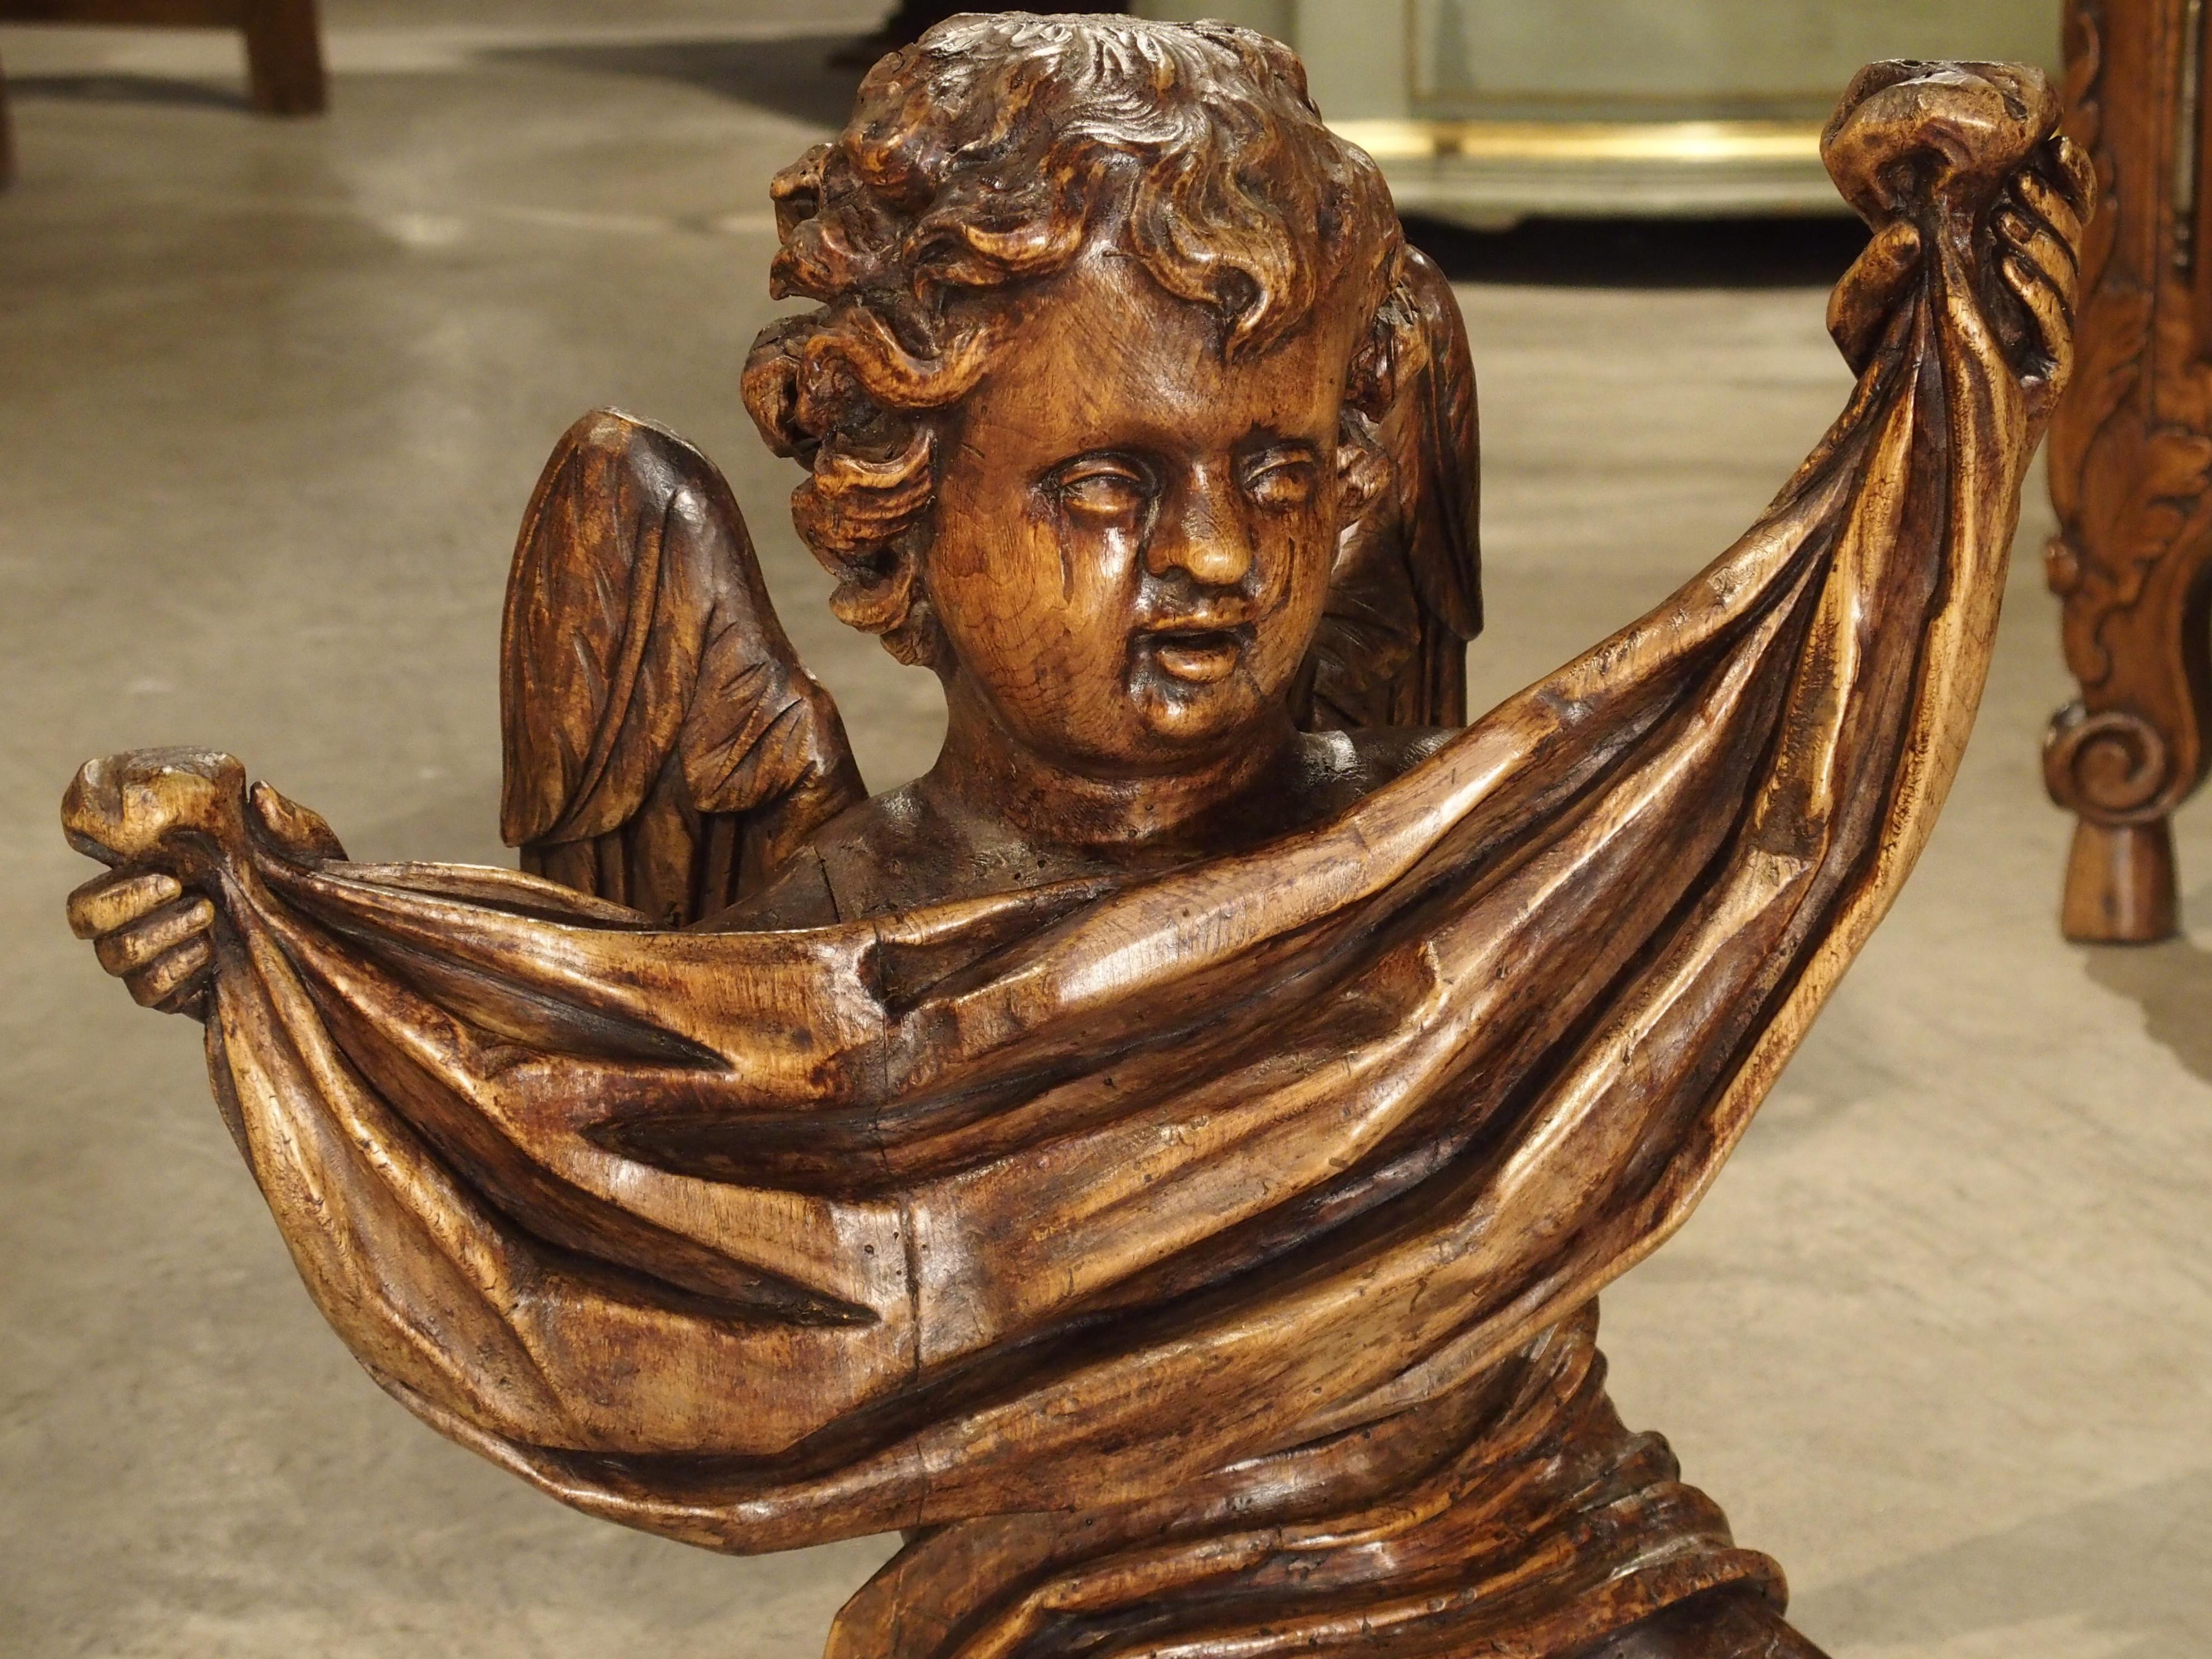 This hand-carved seated cherub is of a nice size at nearly 23 inches tall. The cherub is holding a piece of draped cloth in front of its chest and still has both wings intact. The sculptor who carved this cherub was very good at the figural